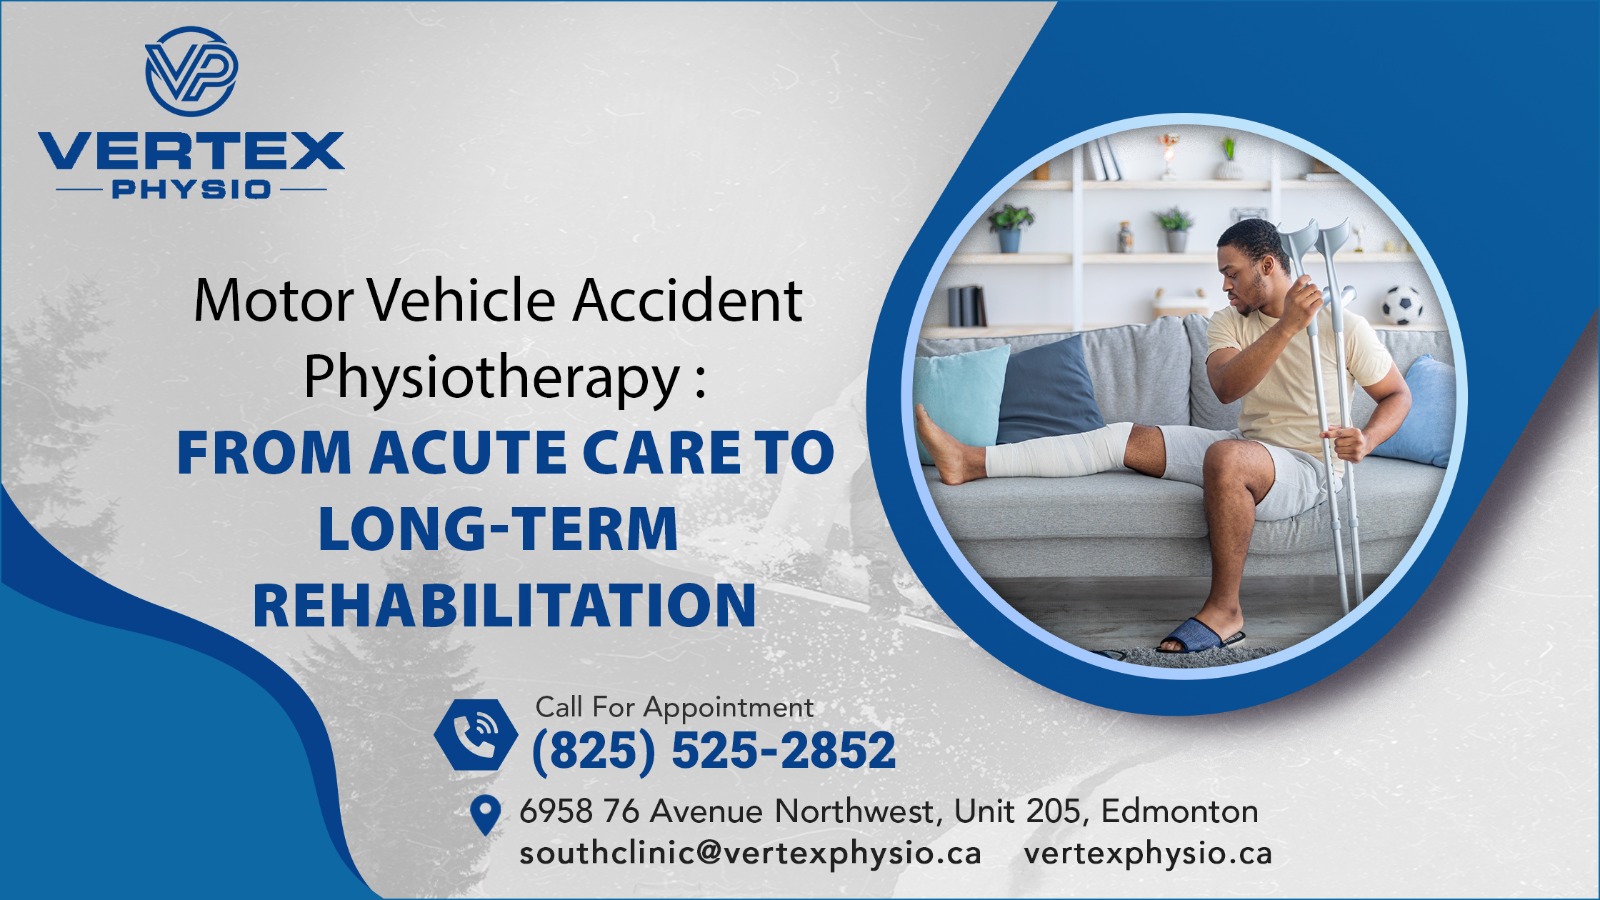 Motor Vehicle Accident Physiotherapy: From Acute Care to Long-Term Rehabilitation